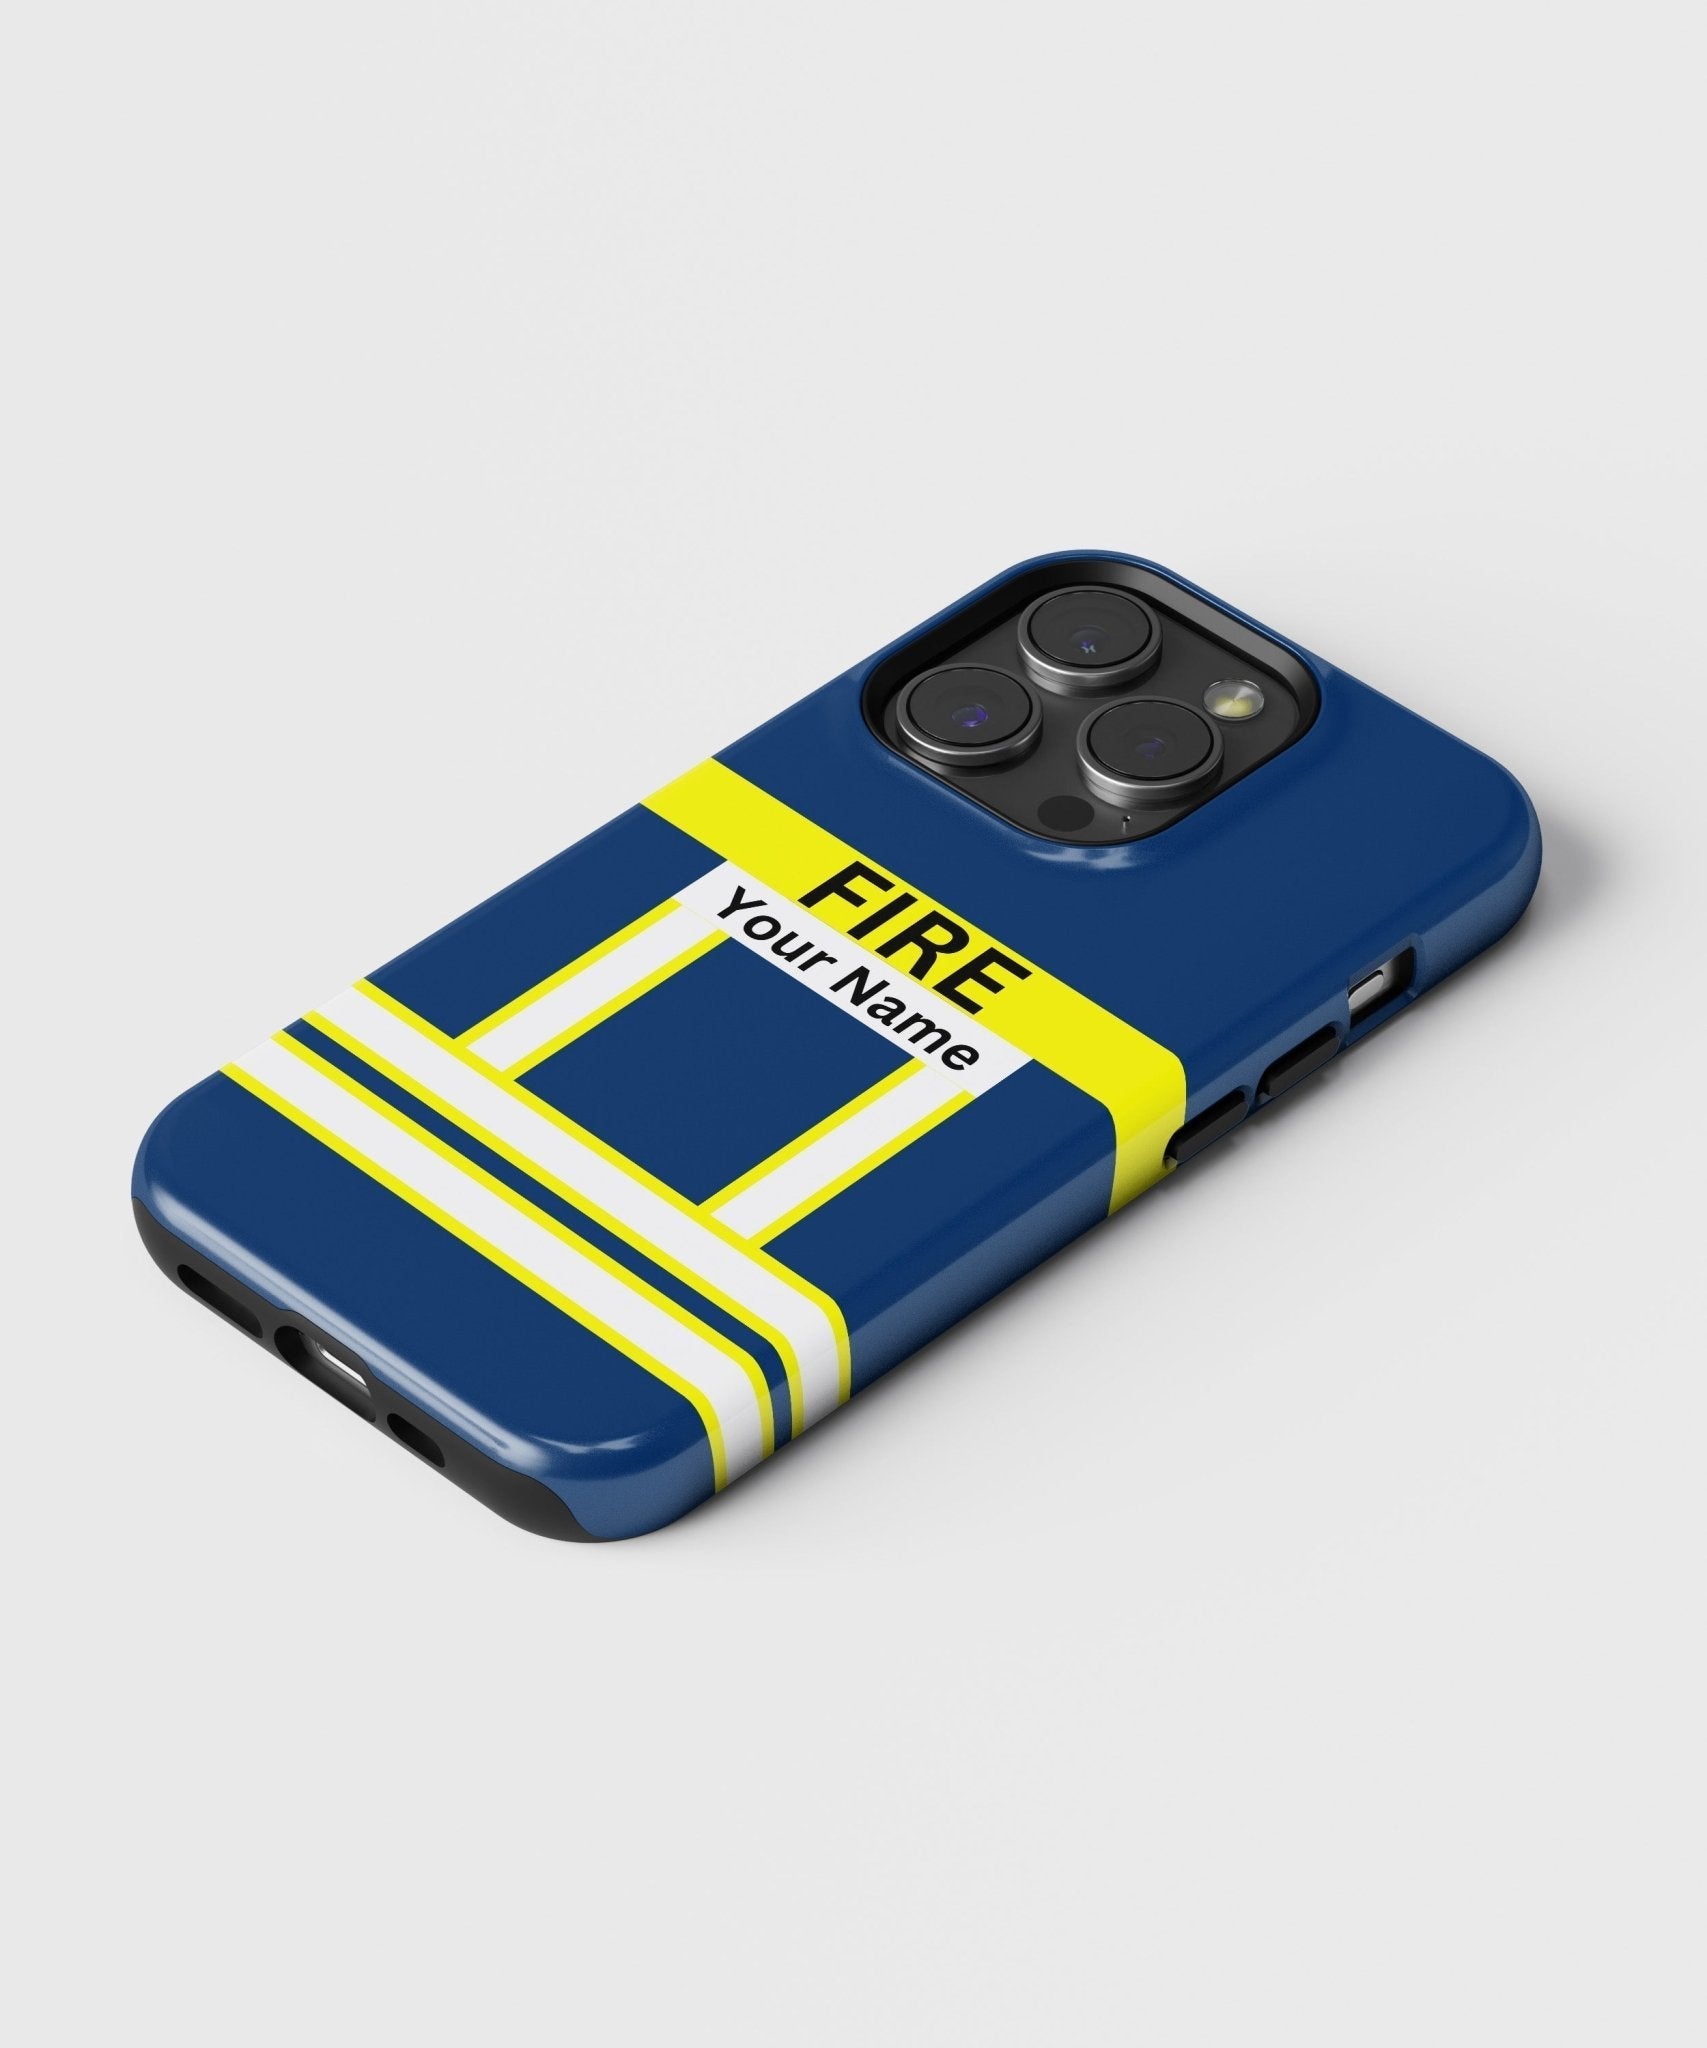 Firefighter Blue Personalizable - iPhone Case